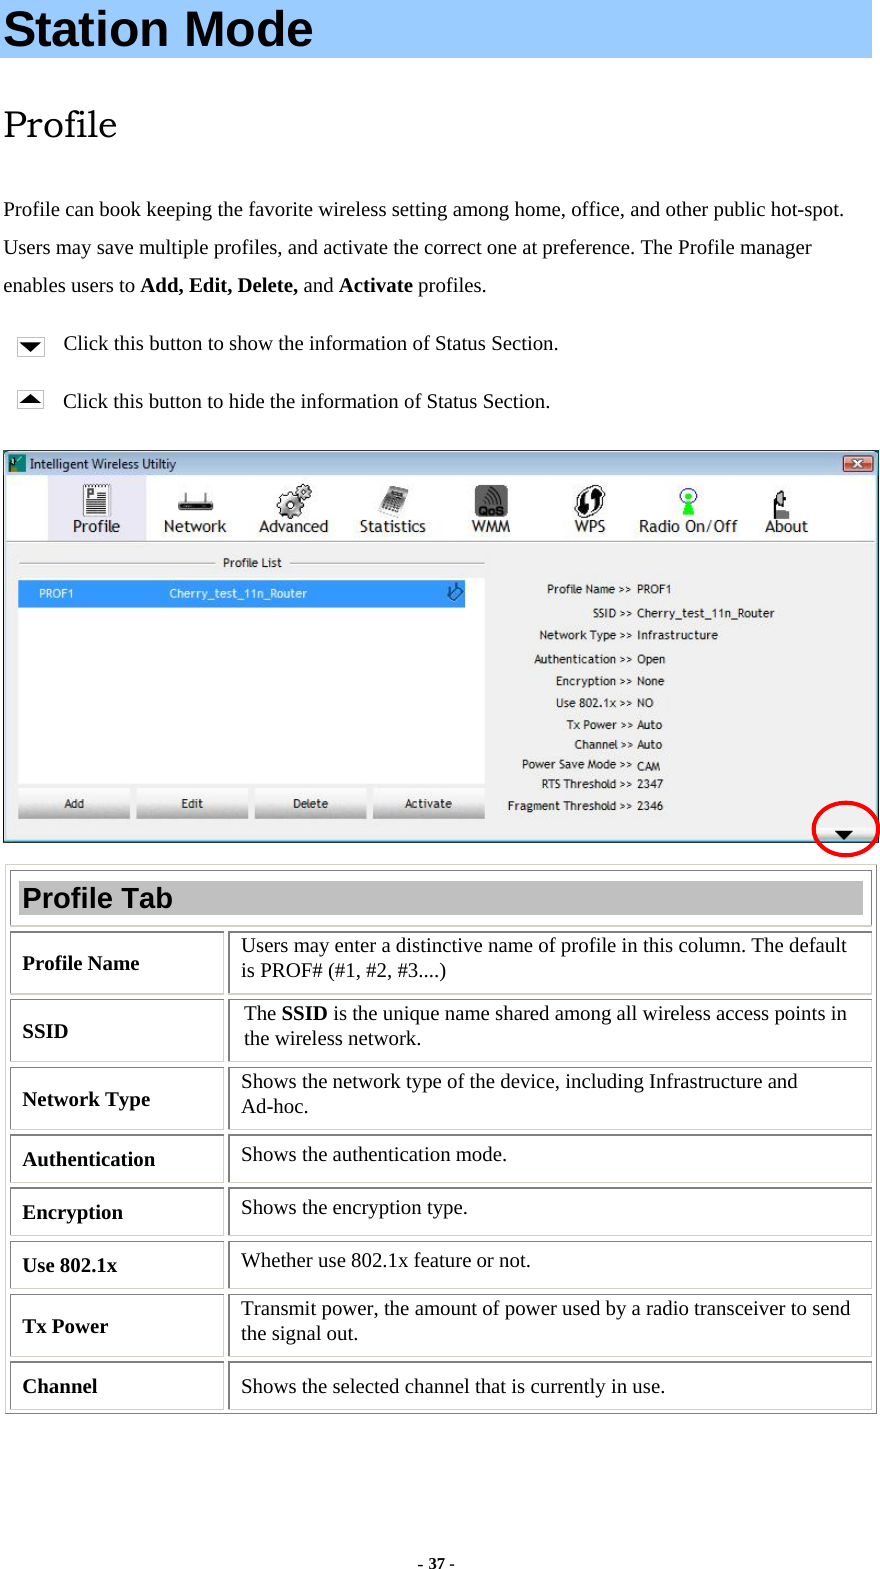  - 37 - Station Mode Profile Profile can book keeping the favorite wireless setting among home, office, and other public hot-spot. Users may save multiple profiles, and activate the correct one at preference. The Profile manager enables users to Add, Edit, Delete, and Activate profiles. Click this button to show the information of Status Section. Click this button to hide the information of Status Section.  Profile Tab Profile Name  Users may enter a distinctive name of profile in this column. The default is PROF# (#1, #2, #3....) SSID  The SSID is the unique name shared among all wireless access points in the wireless network. Network Type  Shows the network type of the device, including Infrastructure and Ad-hoc. Authentication  Shows the authentication mode. Encryption  Shows the encryption type. Use 802.1x    Whether use 802.1x feature or not. Tx Power    Transmit power, the amount of power used by a radio transceiver to send the signal out. Channel  Shows the selected channel that is currently in use.   